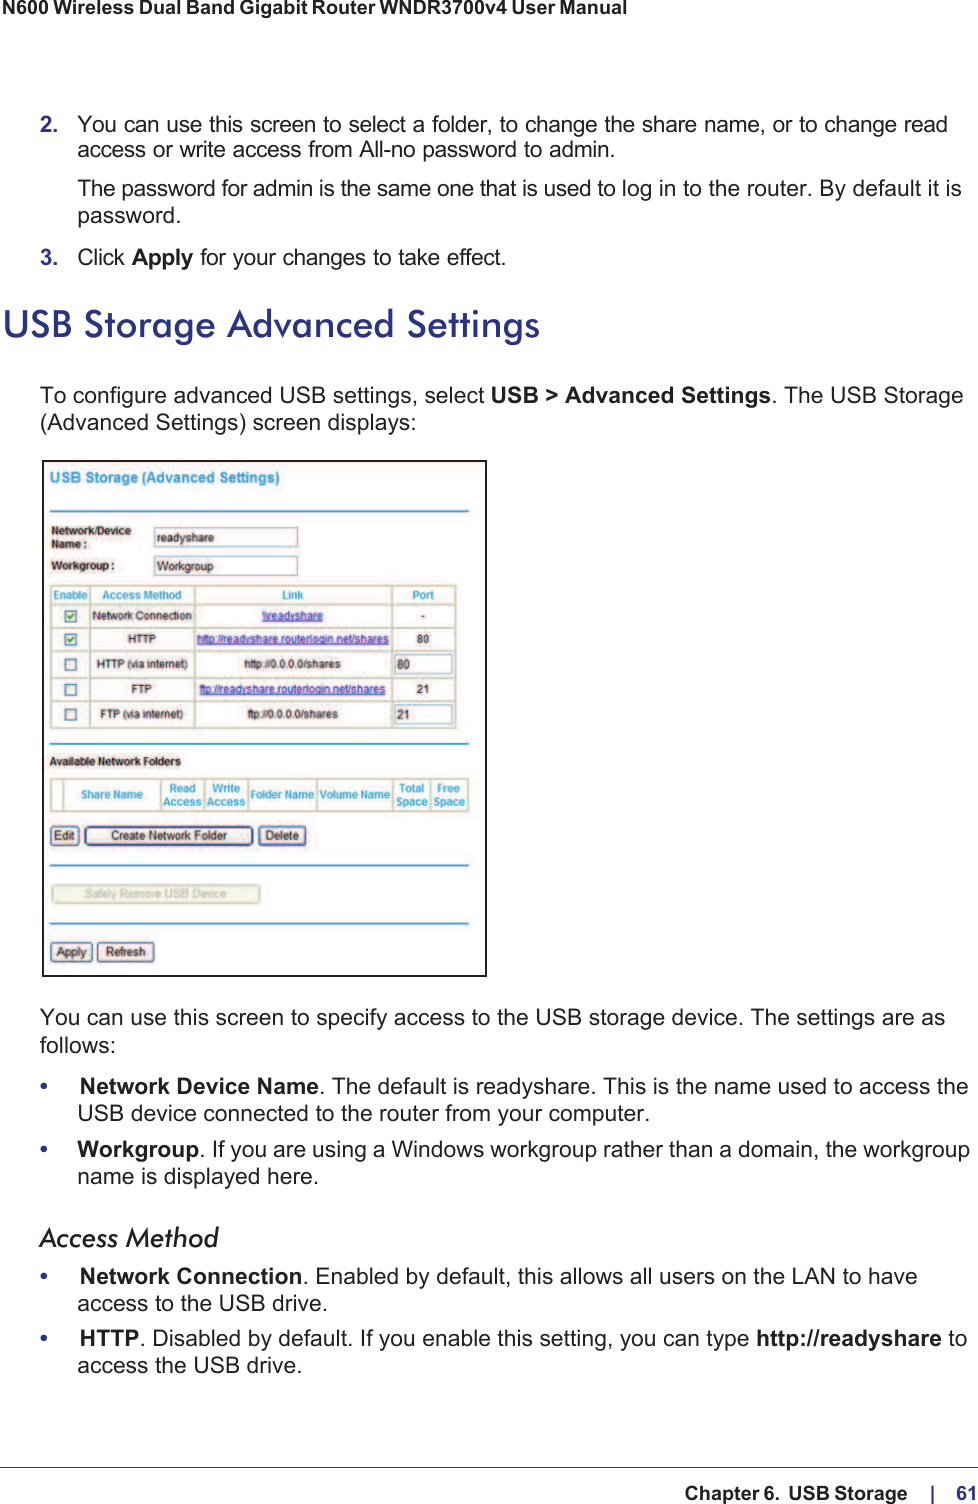   Chapter 6.  USB Storage     |    61N600 Wireless Dual Band Gigabit Router WNDR3700v4 User Manual 2. You can use this screen to select a folder, to change the share name, or to change read access or write access from All-no password to admin. The password for admin is the same one that is used to log in to the router. By default it is password.3. Click Apply for your changes to take effect.USB Storage Advanced SettingsTo configure advanced USB settings, select USB &gt; Advanced Settings. The USB Storage (Advanced Settings) screen displays:You can use this screen to specify access to the USB storage device. The settings are as follows:•Network Device Name. The default is readyshare. This is the name used to access the USB device connected to the router from your computer.•Workgroup. If you are using a Windows workgroup rather than a domain, the workgroup name is displayed here.Access Method•Network Connection. Enabled by default, this allows all users on the LAN to have access to the USB drive.•HTTP. Disabled by default. If you enable this setting, you can type http://readyshare to access the USB drive.